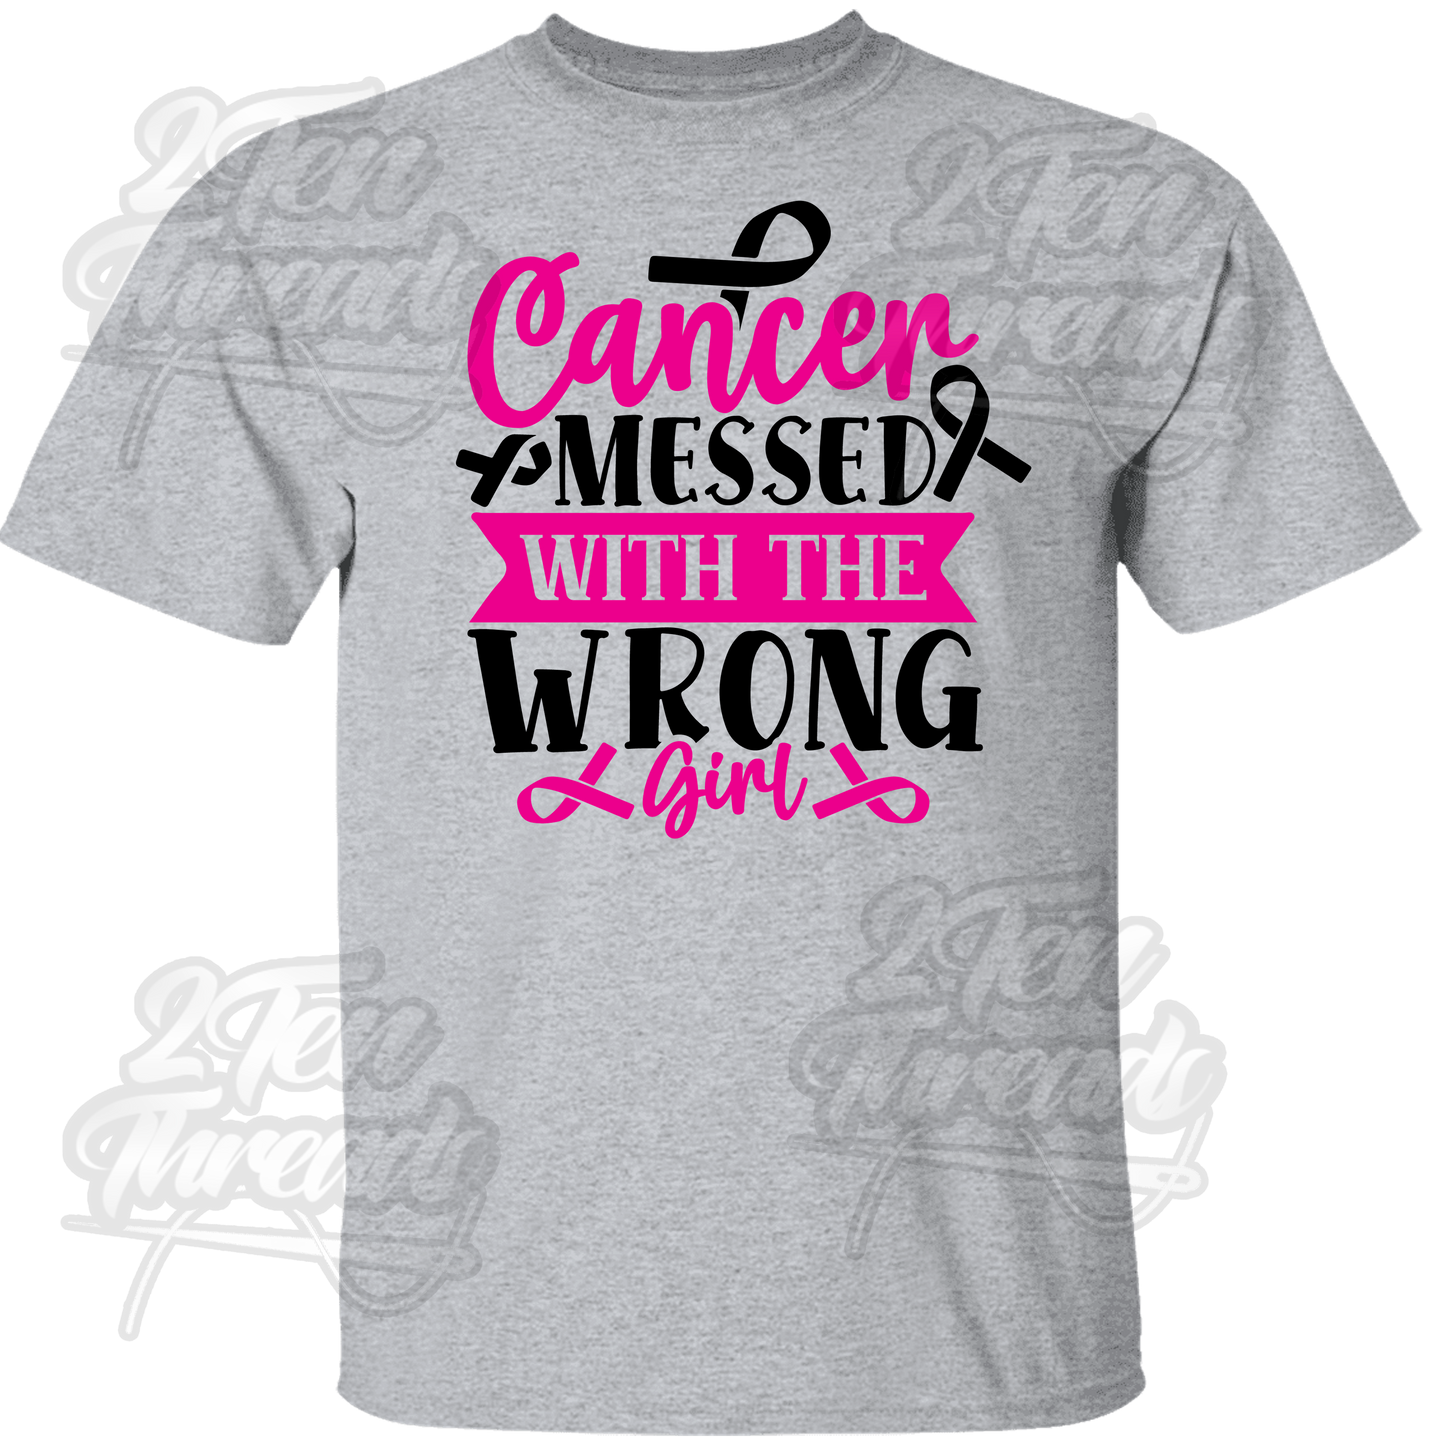 Messed with the Wrong girl Shirt